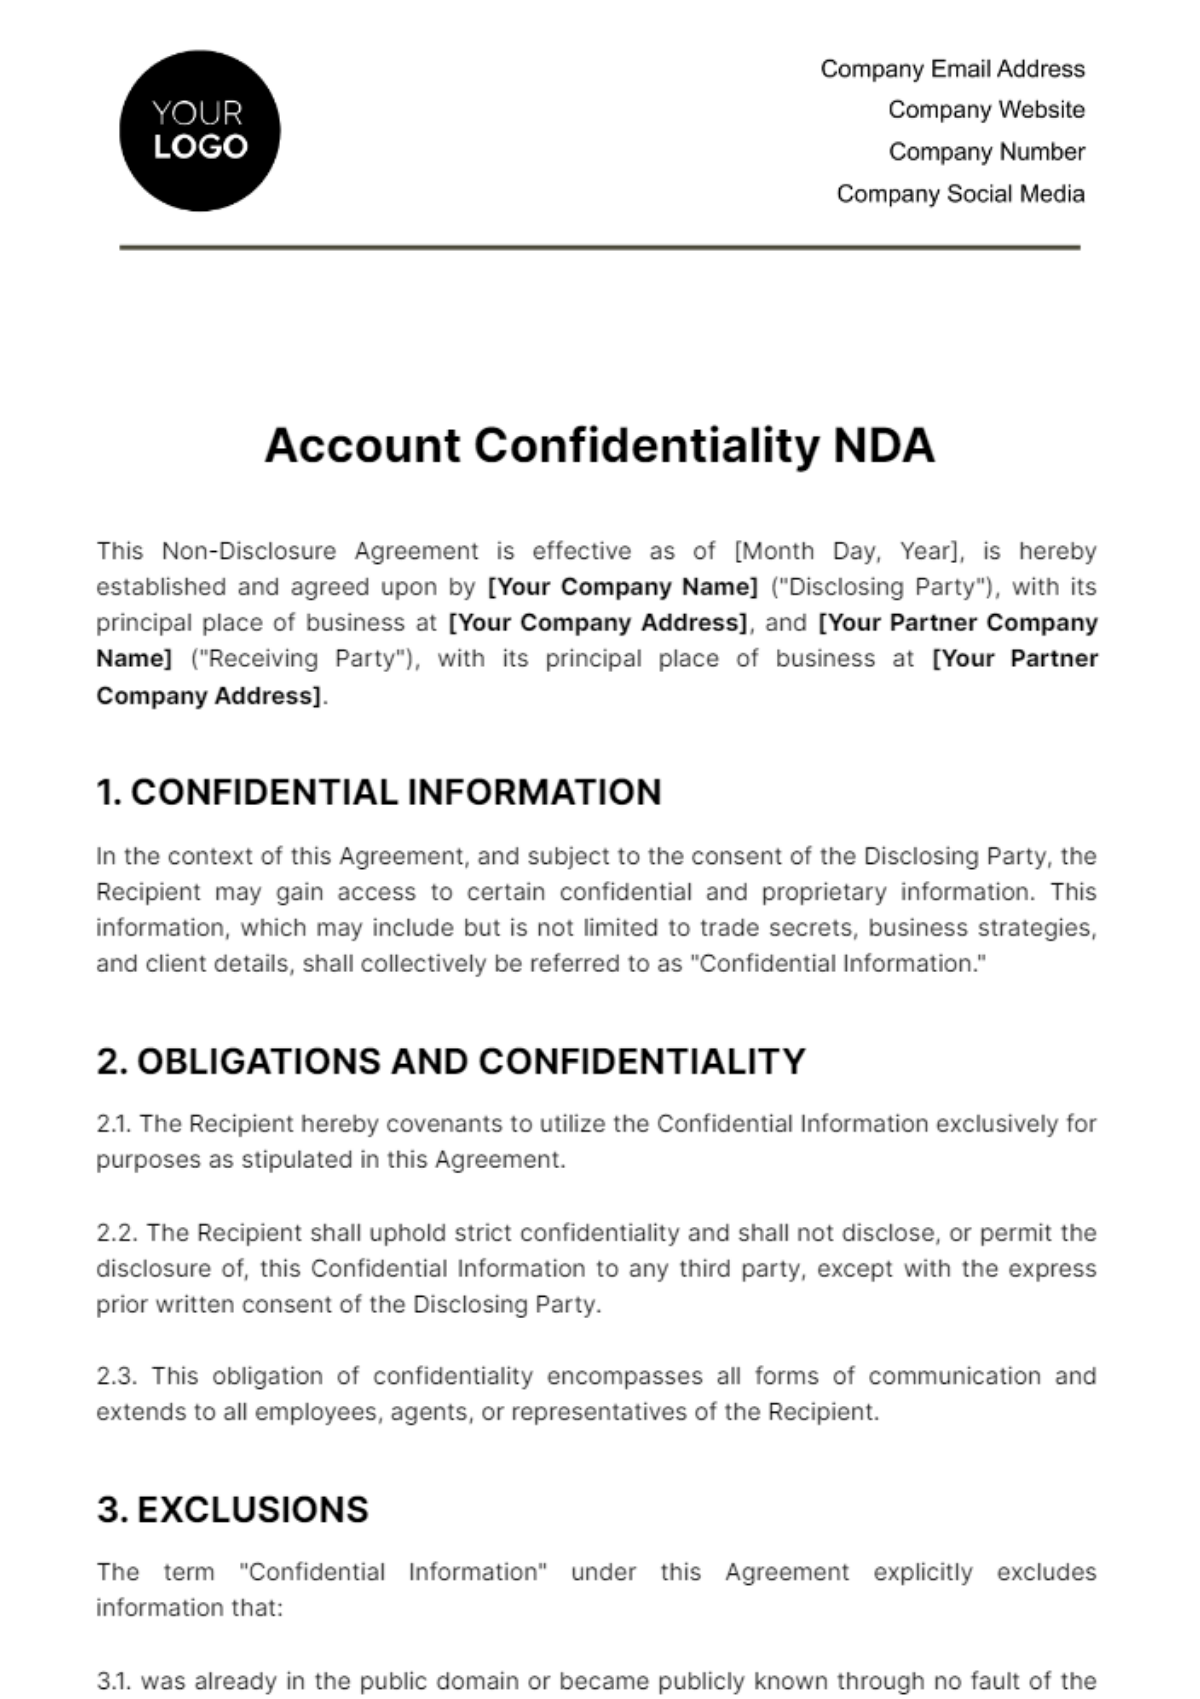 Free Account Confidentiality NDA Template